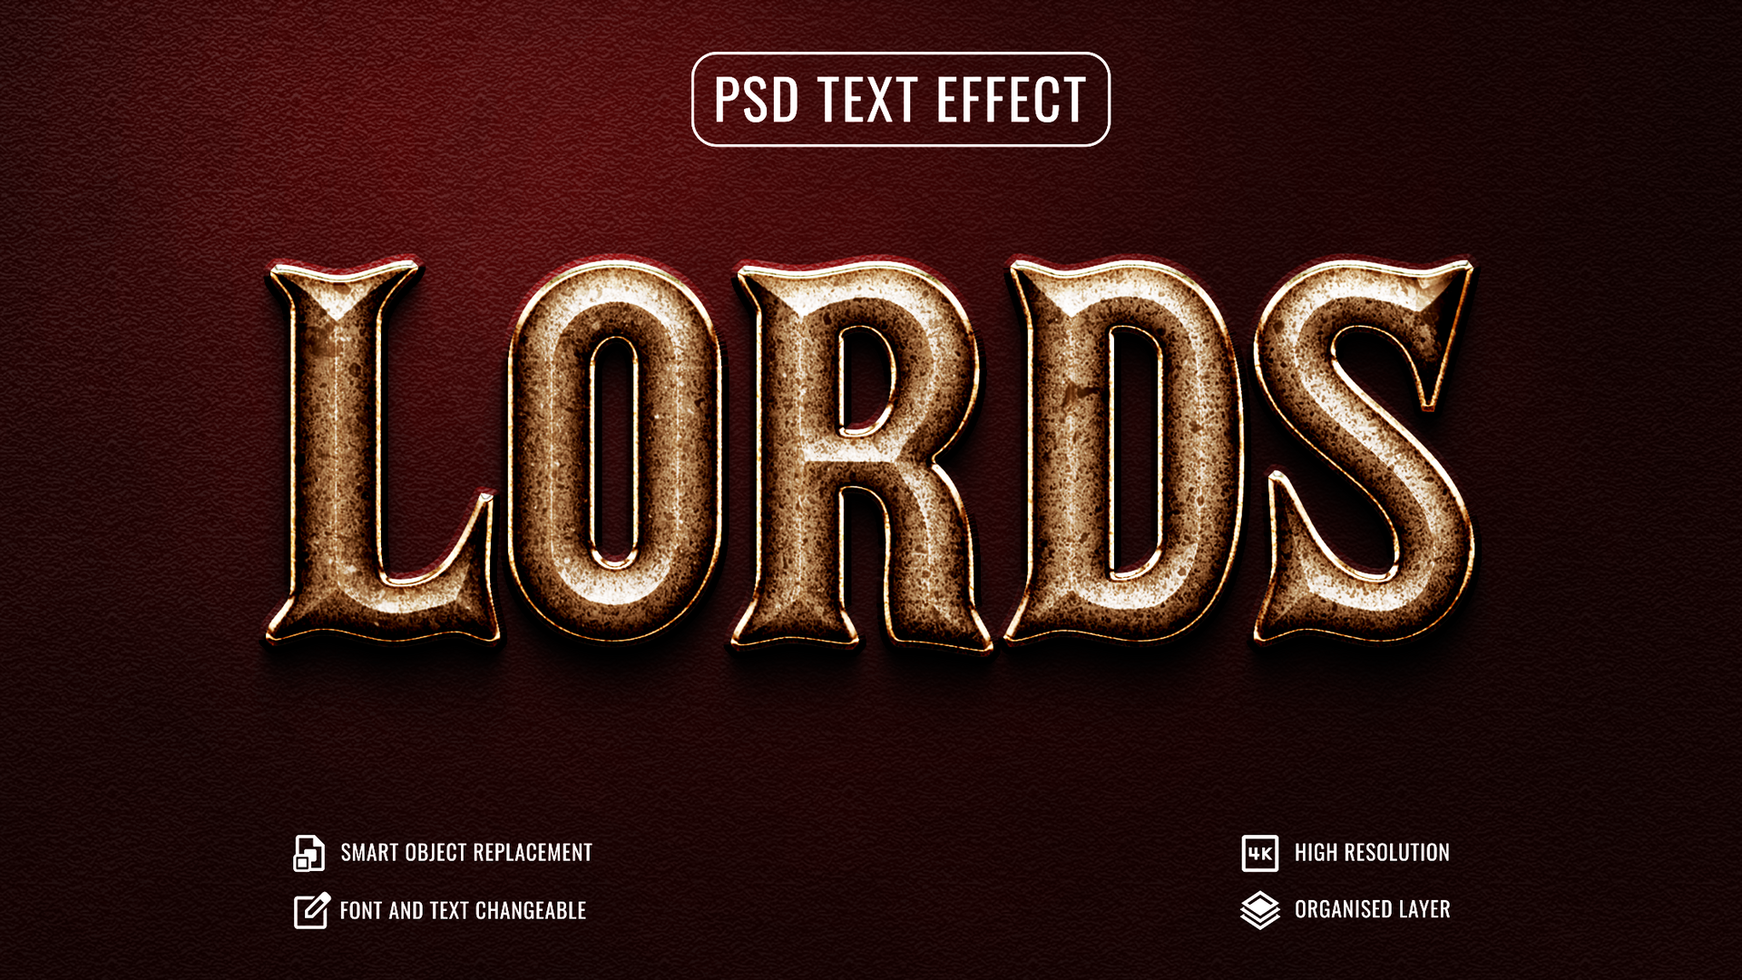 lords luxury vintage text effect in gold title psd